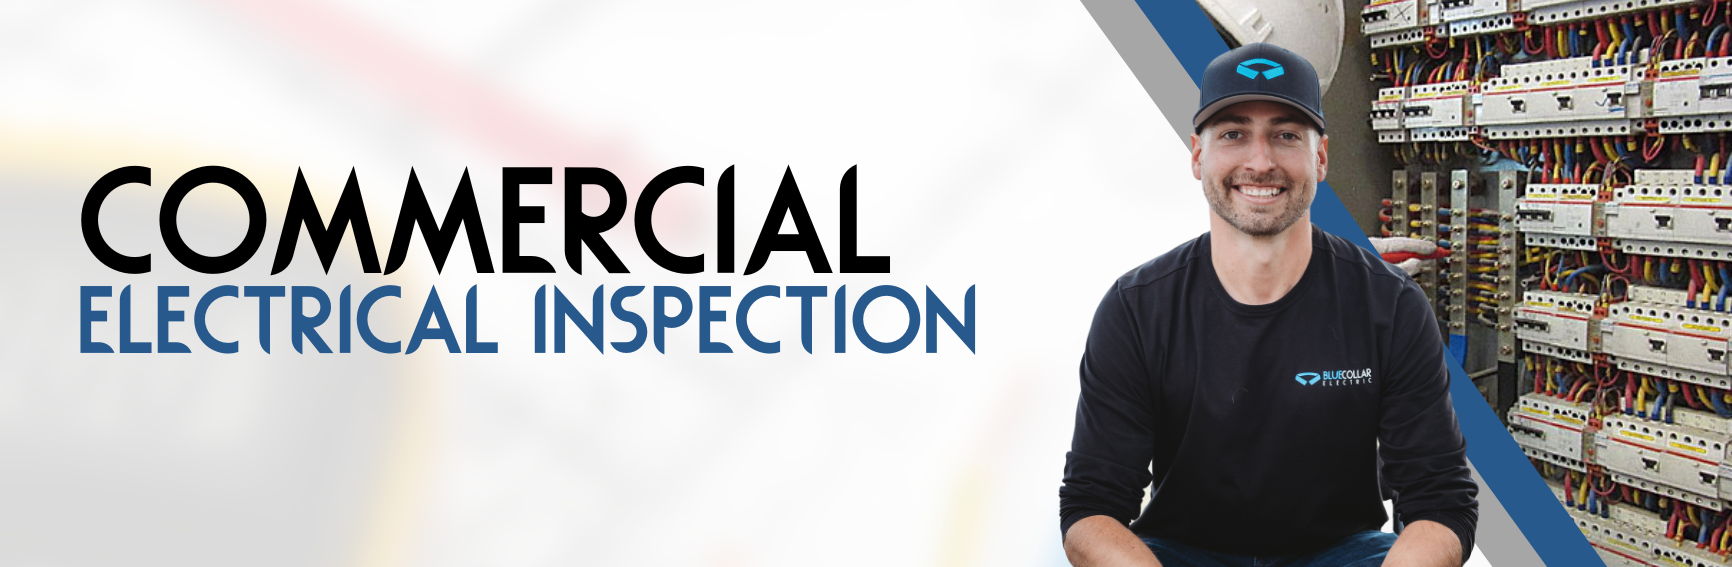 Industrial Electrical Inspection | Blue Collar Electric